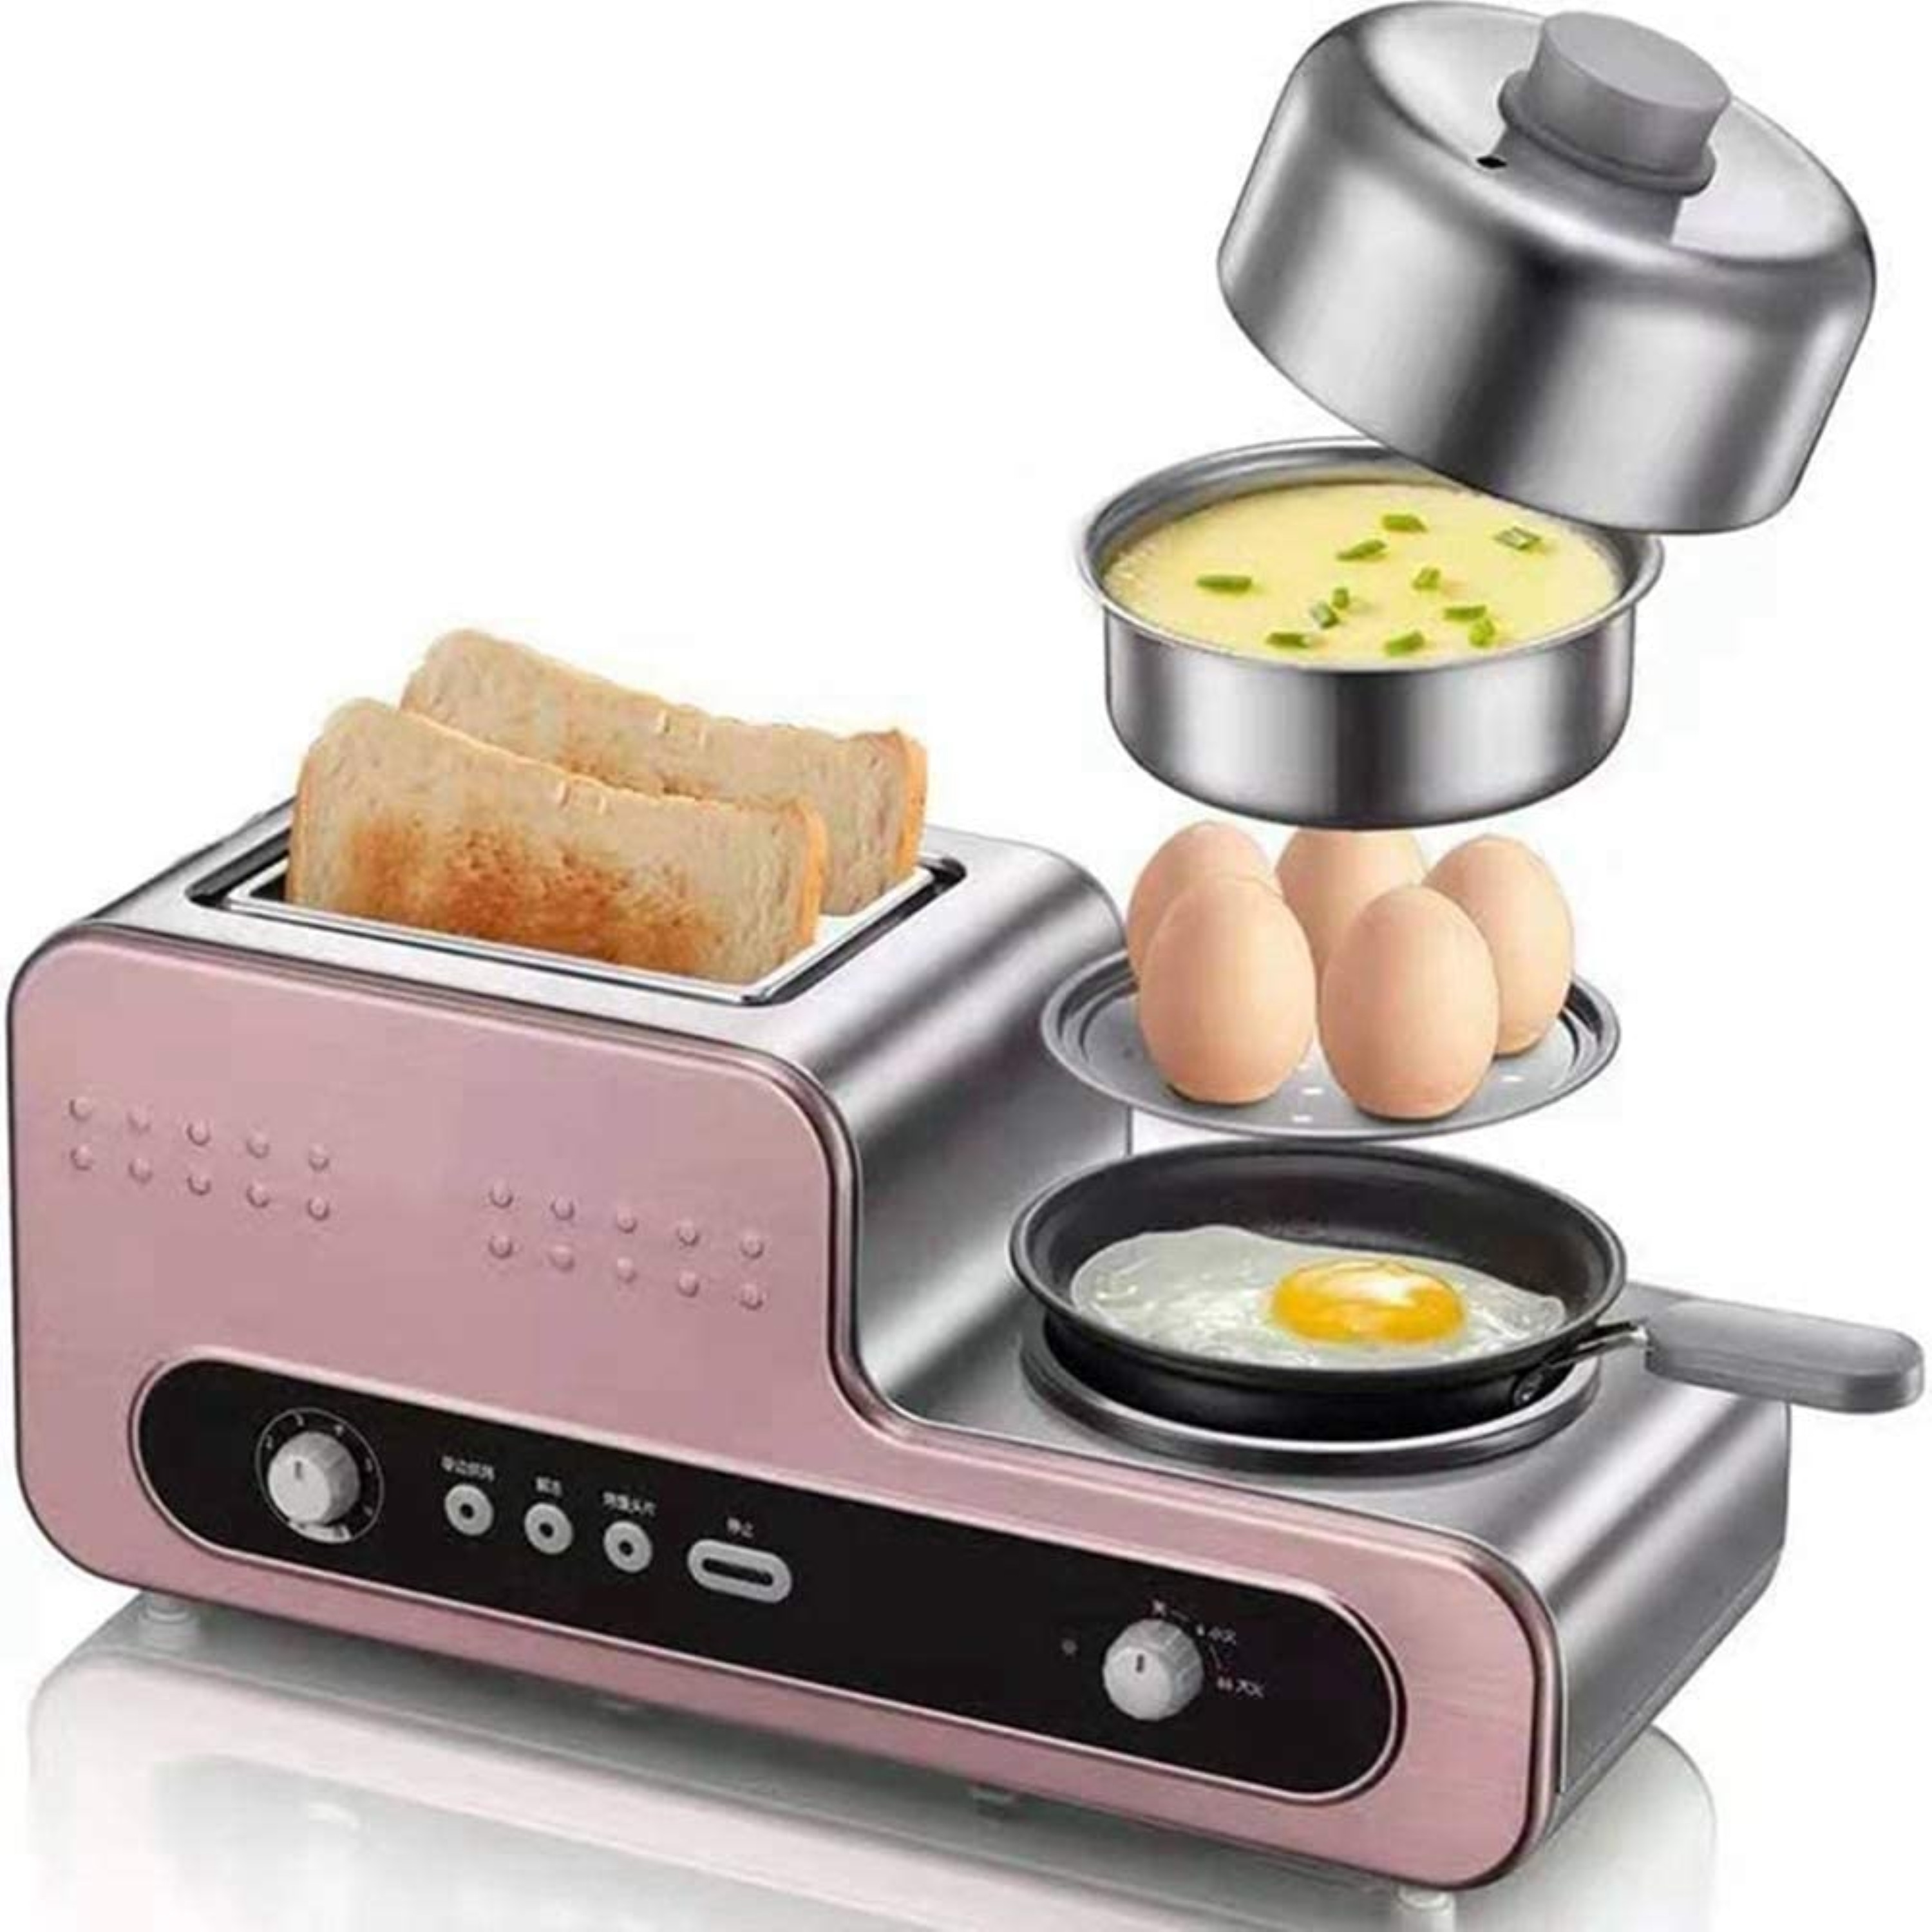 https://ak1.ostkcdn.com/images/products/is/images/direct/836bed5c5087946c9b9d3a122ffd7bf2b594fb7f/Egg-Boiler-Multifunction-Breakfast-Maker-Bread-Baking-Machine-2-Slices-Toaster-Oven.jpg